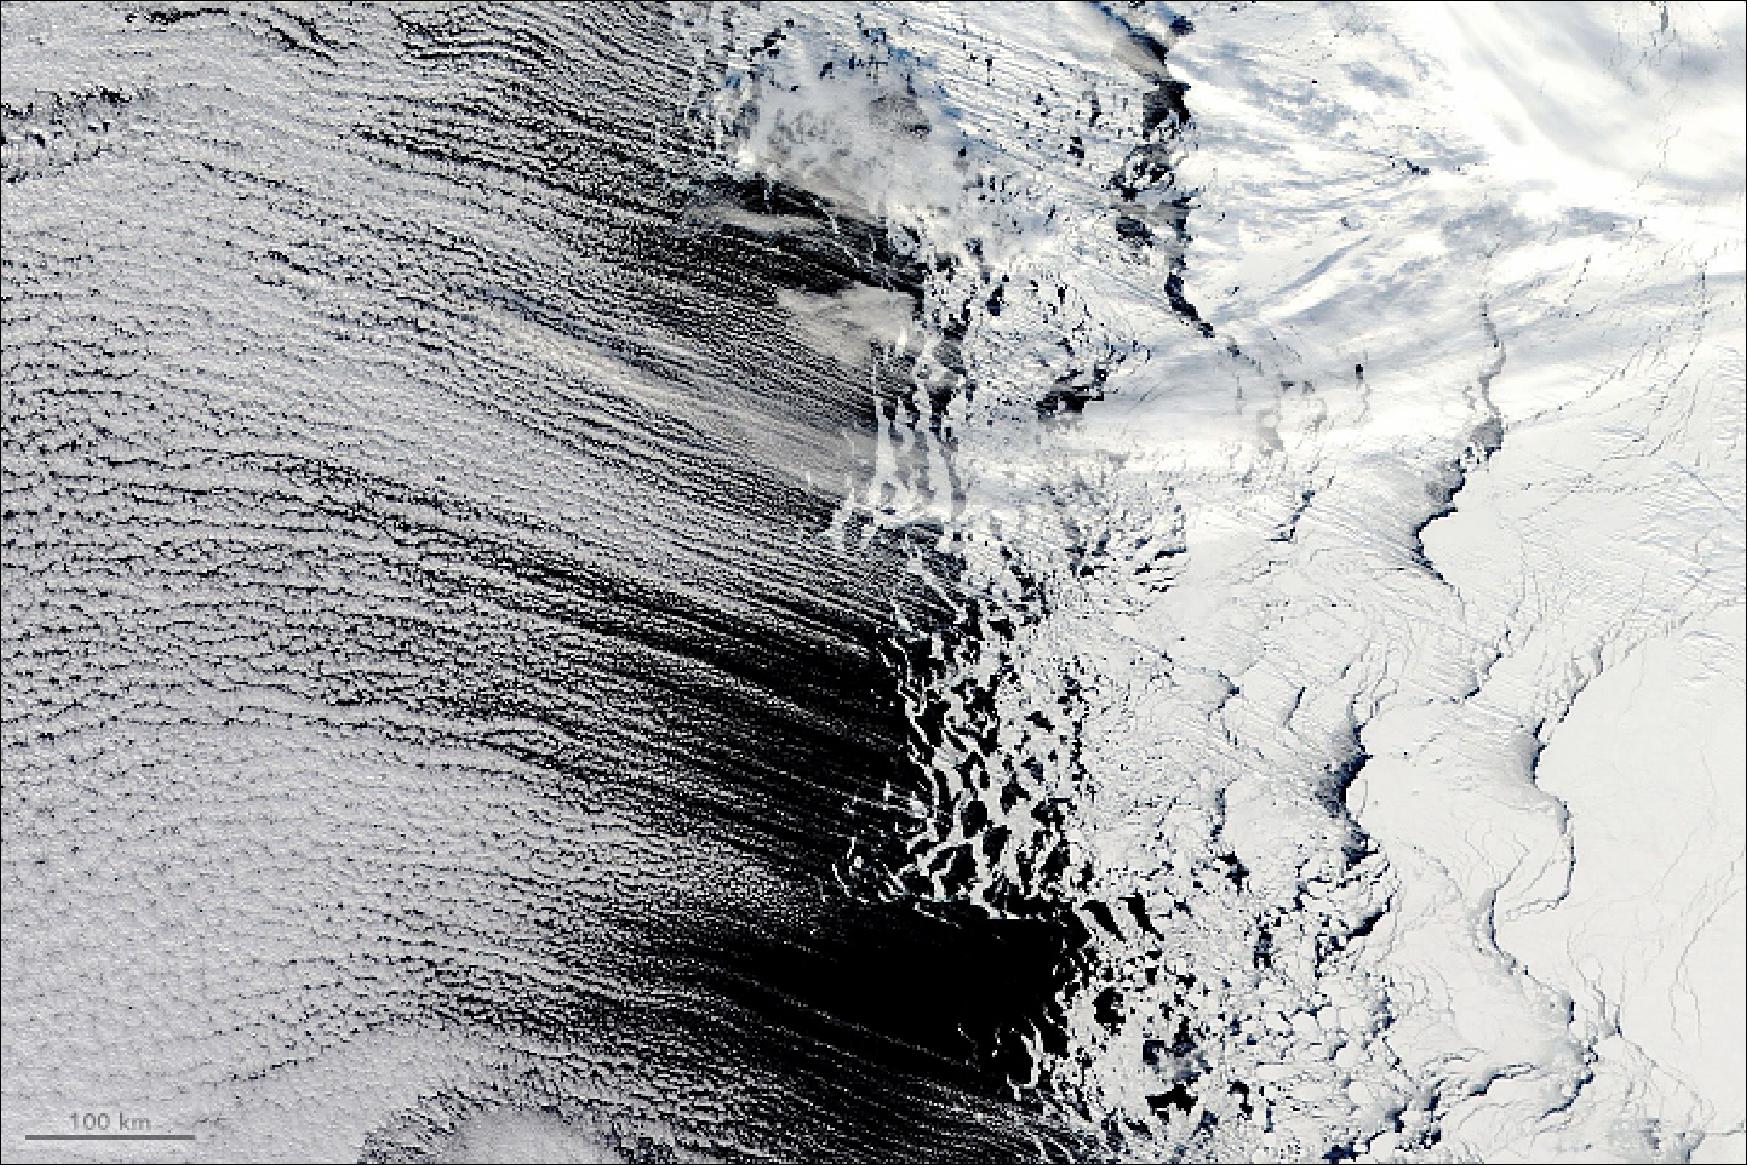 Figure 55: Cold air blows over warmer water to produce thin, parallel lines of clouds. MODIS on Aqua captured the scene on 12 September 2018 (image credit: NASA Earth Observatory, image by Lauren Dauphin, using MODIS data from LANCE/EOSDIS Rapid Response, text by Kasha Patel)